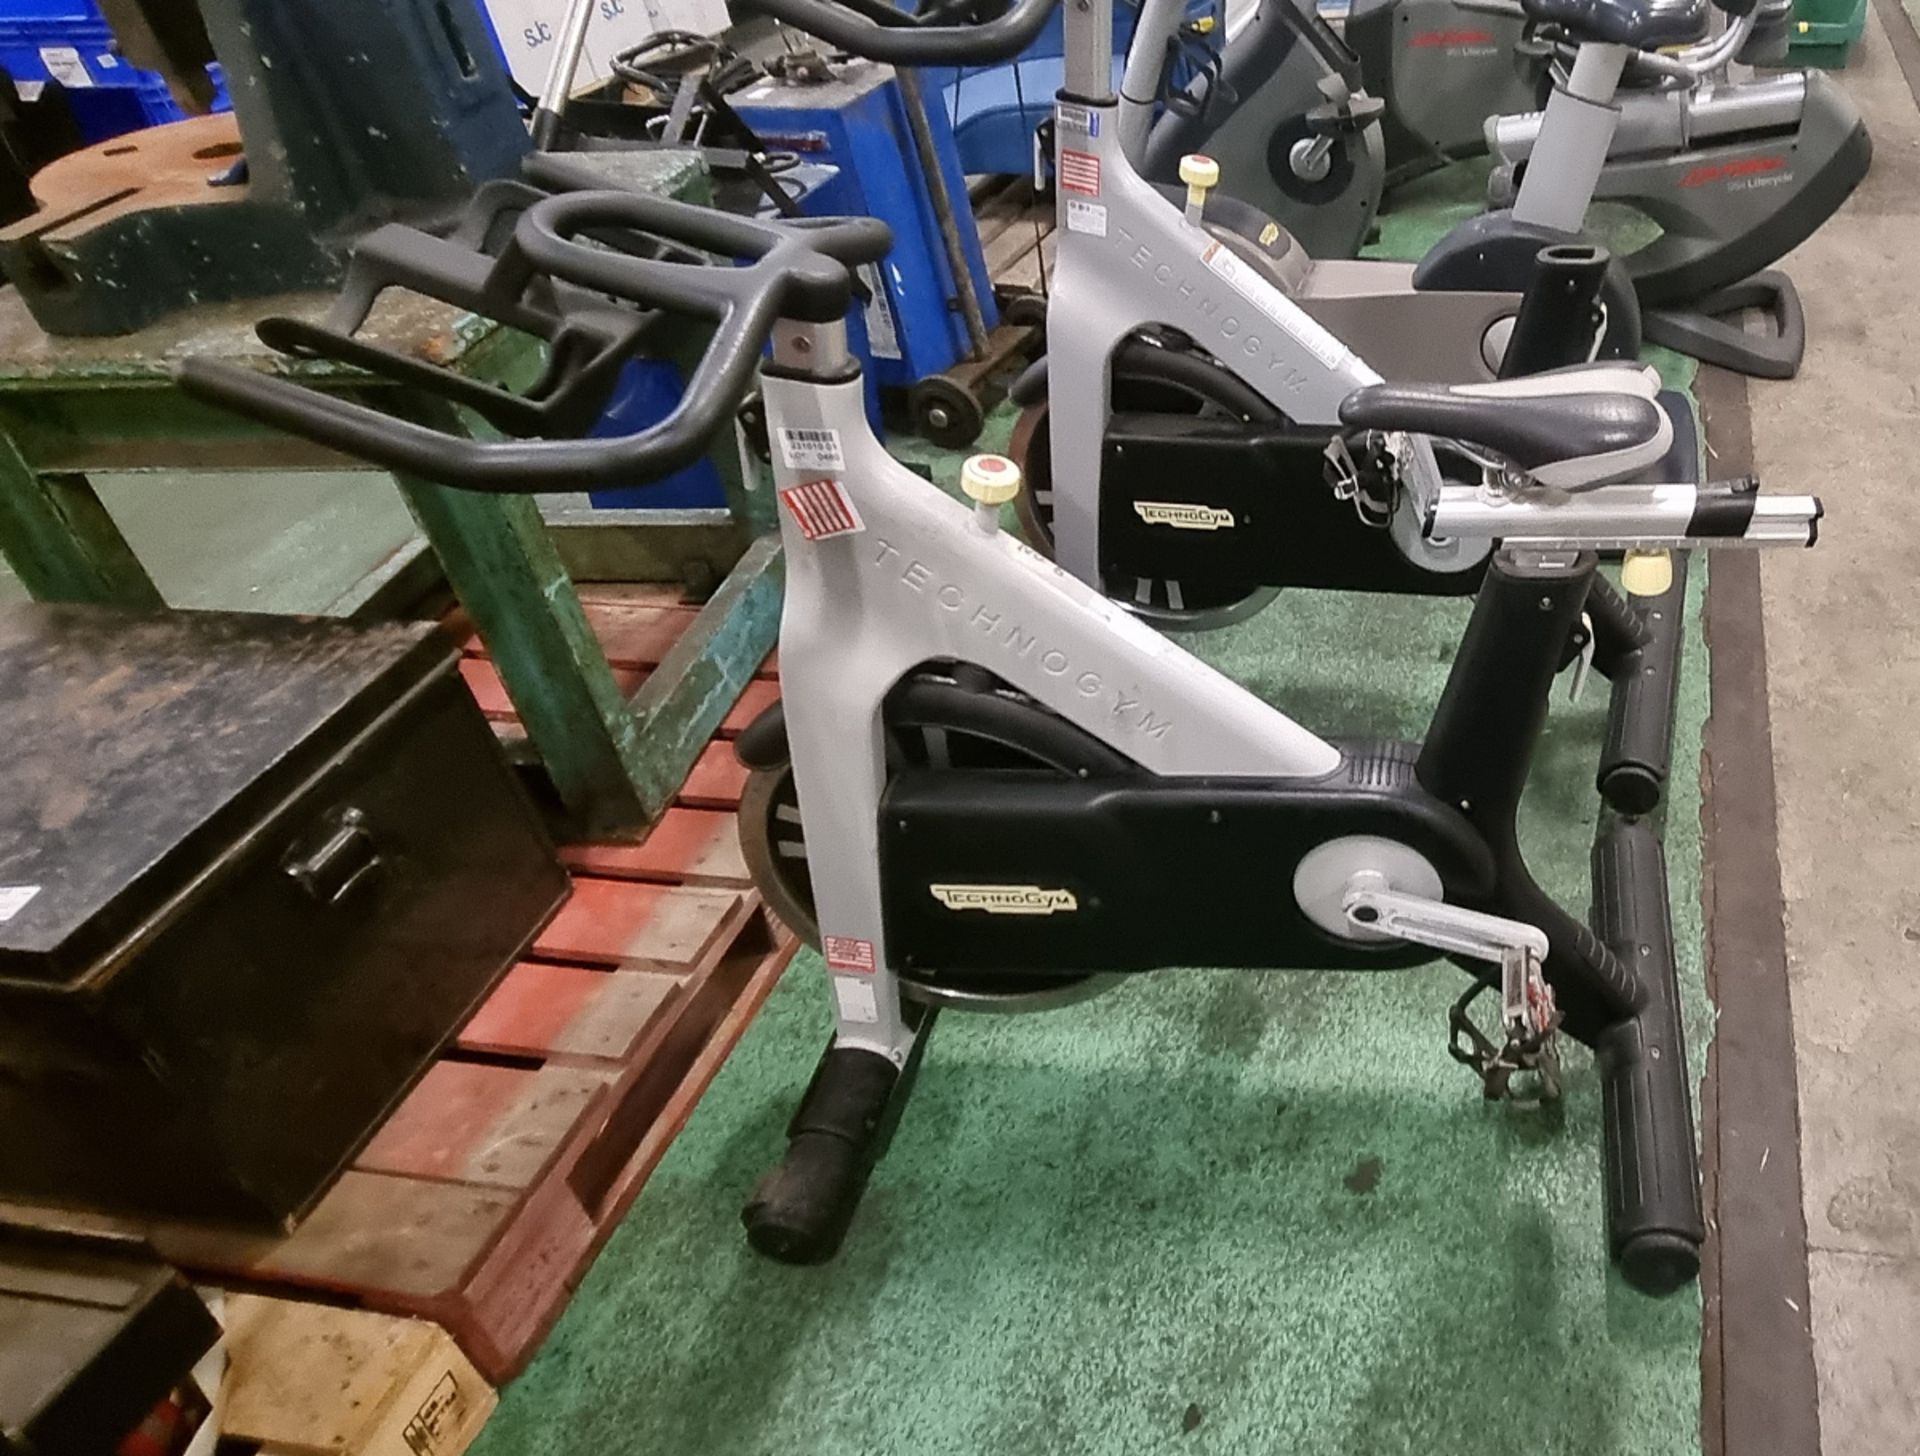 TechnoGym Group Cycle D91PBNE0 spin bike - L 1171 x W 589 x H 1047mm - Image 2 of 2